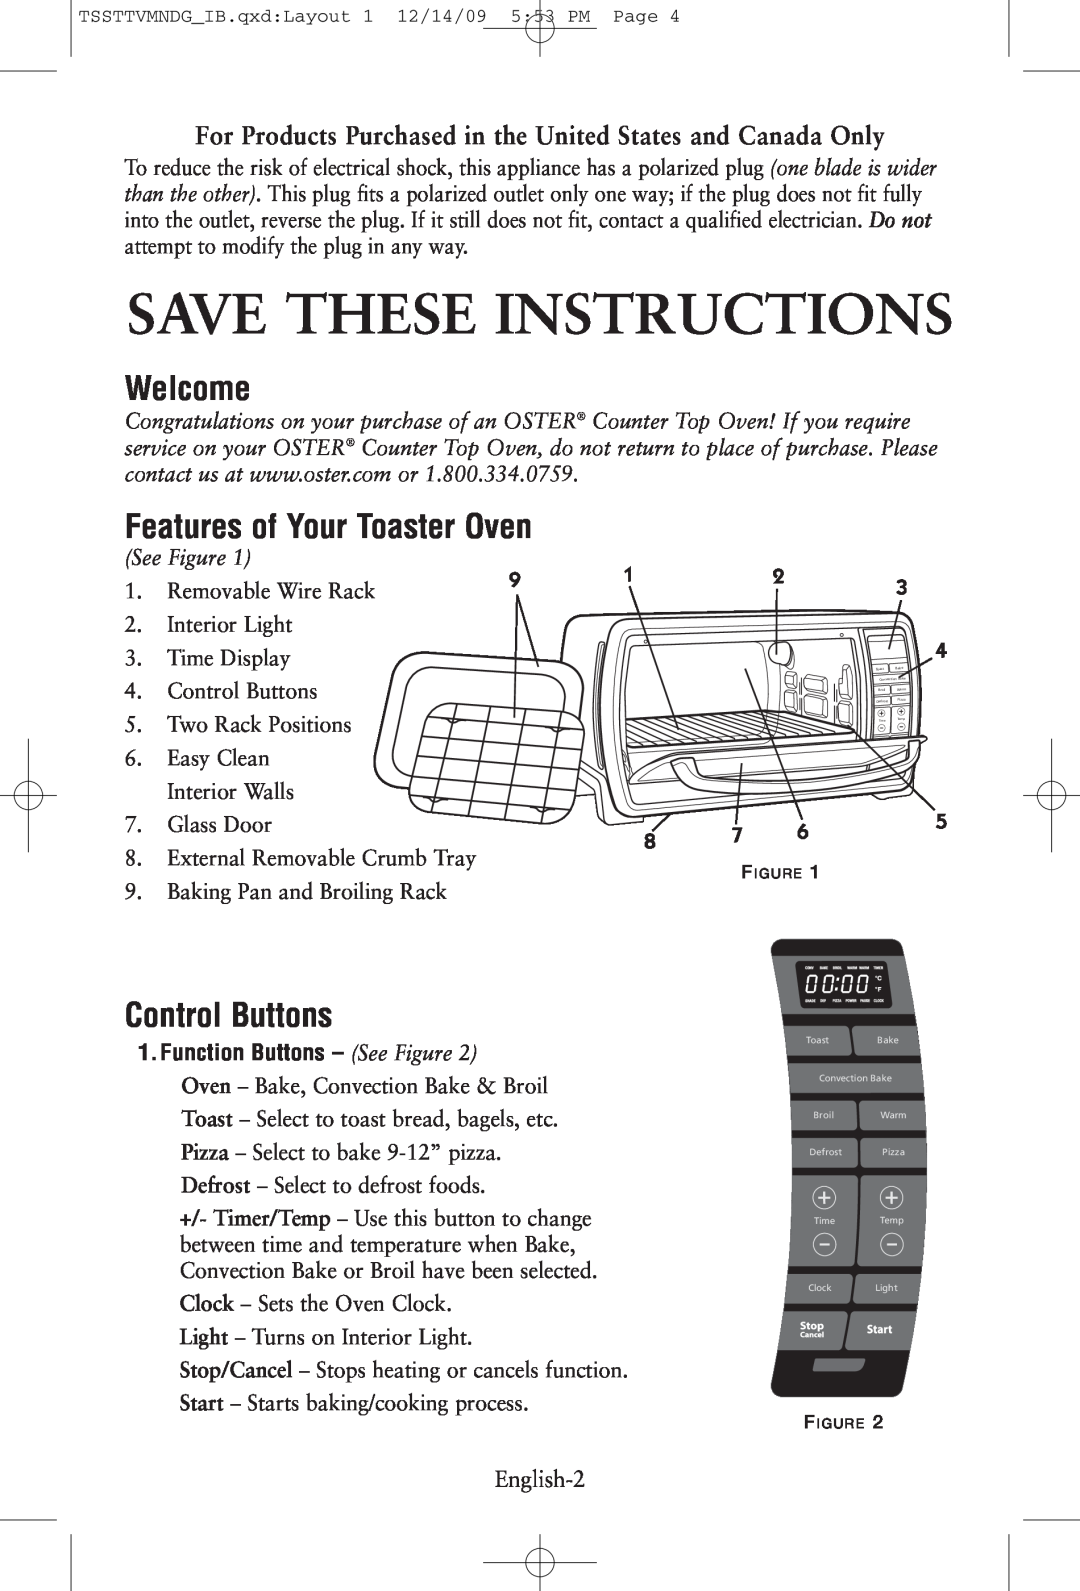 Oster TSSTTVMNDG, 137149 manual Save These Instructions, Welcome, Features of Your Toaster Oven, Control Buttons, See Figure 